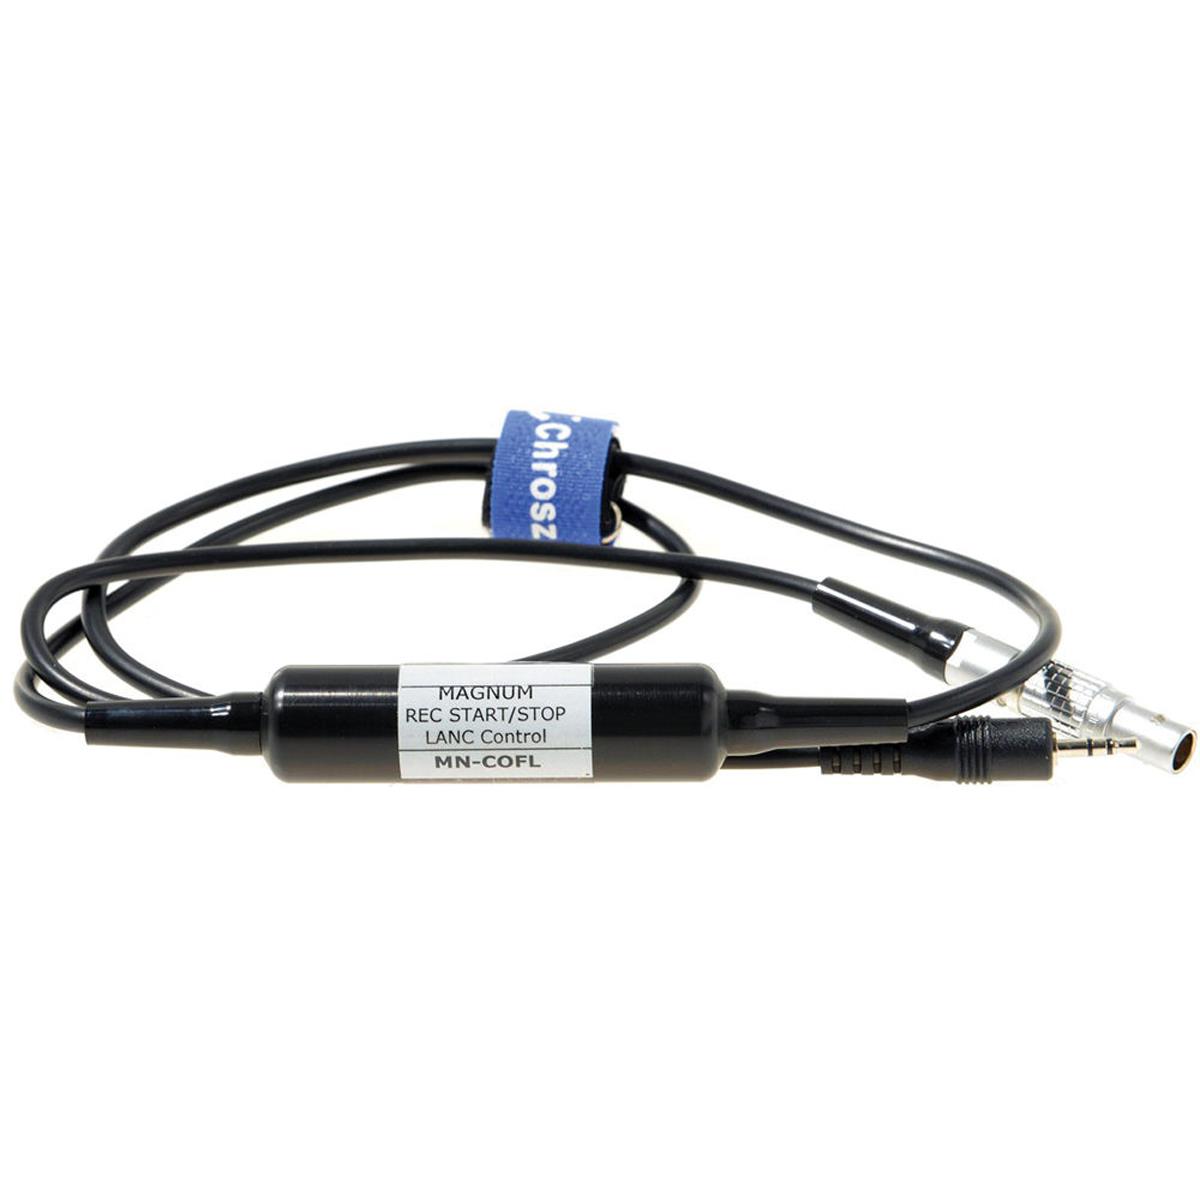 Photos - Cable (video, audio, USB) Chrosziel 23.6" Lemo 0B 9-Pin to 2.5mm Stereo Jack Start/Stop Cable C-MN-C